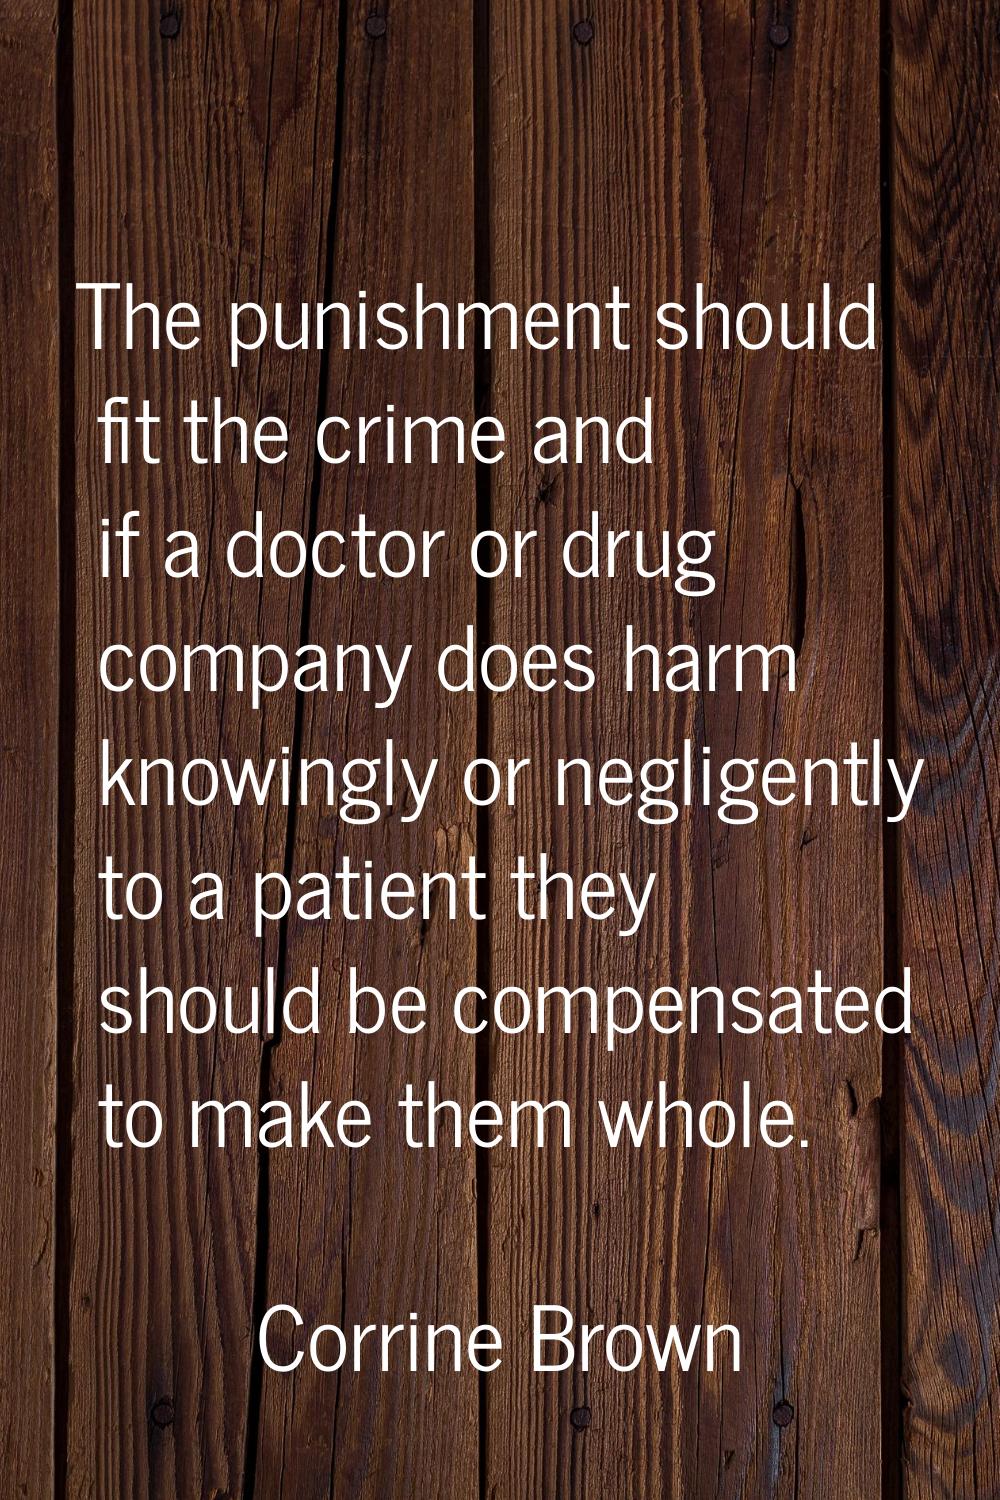 The punishment should fit the crime and if a doctor or drug company does harm knowingly or negligen